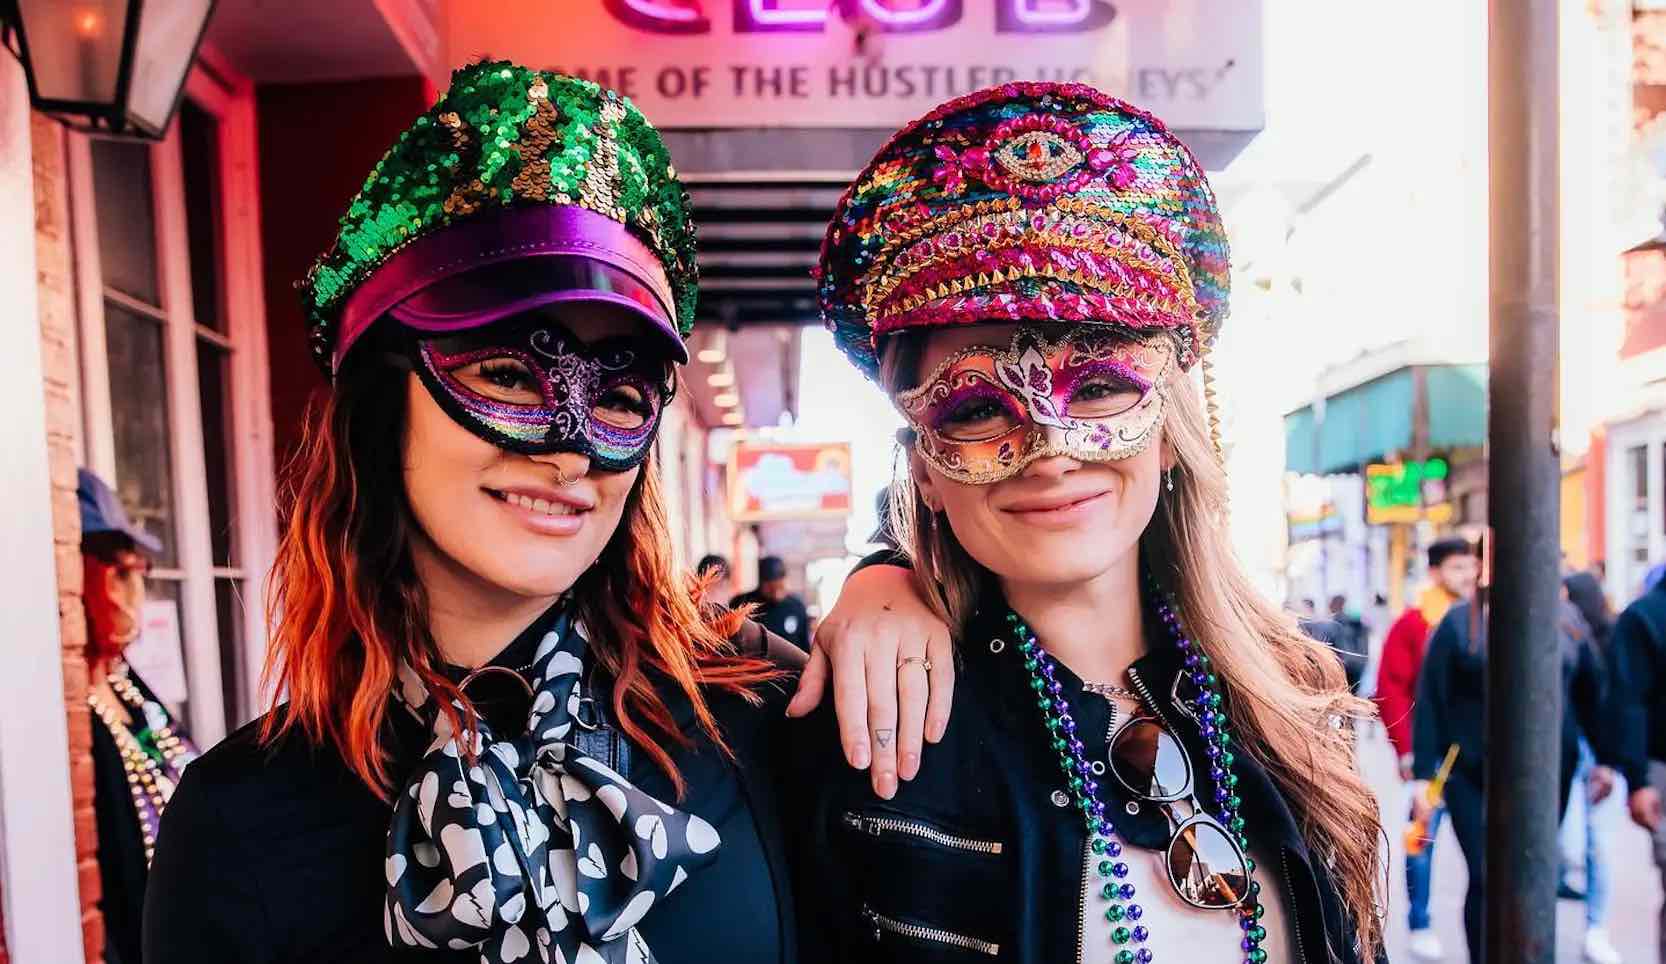 Mardi Gras Outfit & Costume Ideas to Dress Your Best - Exron Music